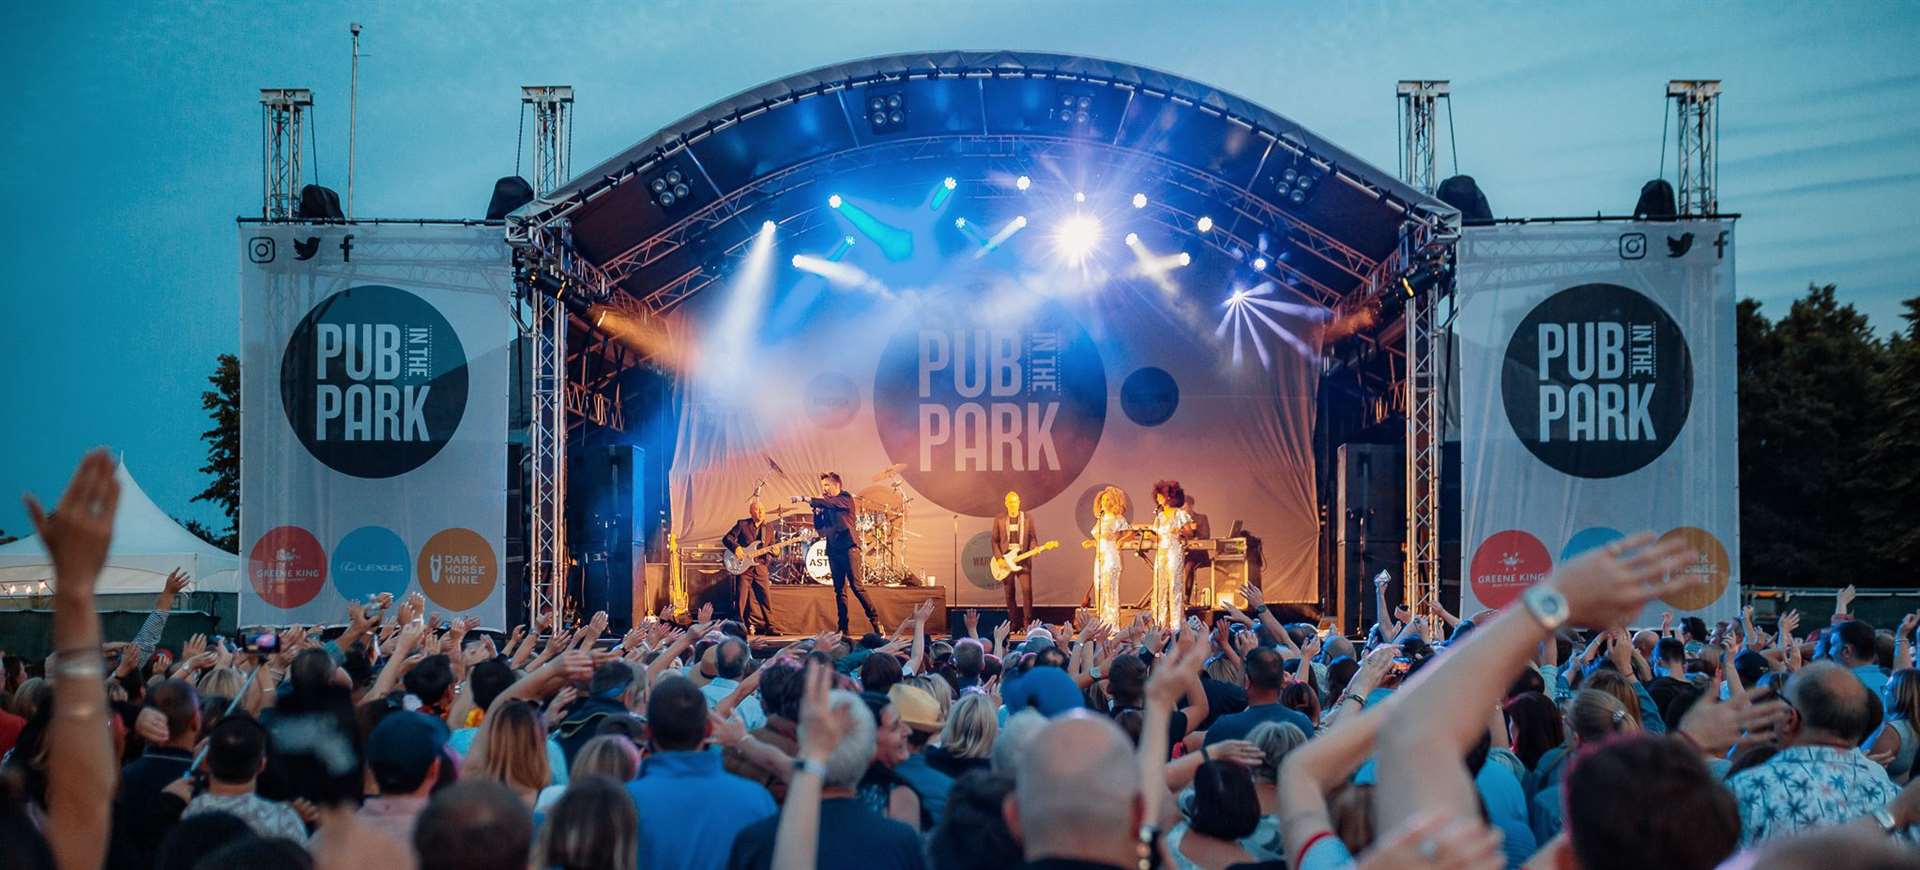 Rick Astley performs at Pub in the Park in Tunbridge Wells